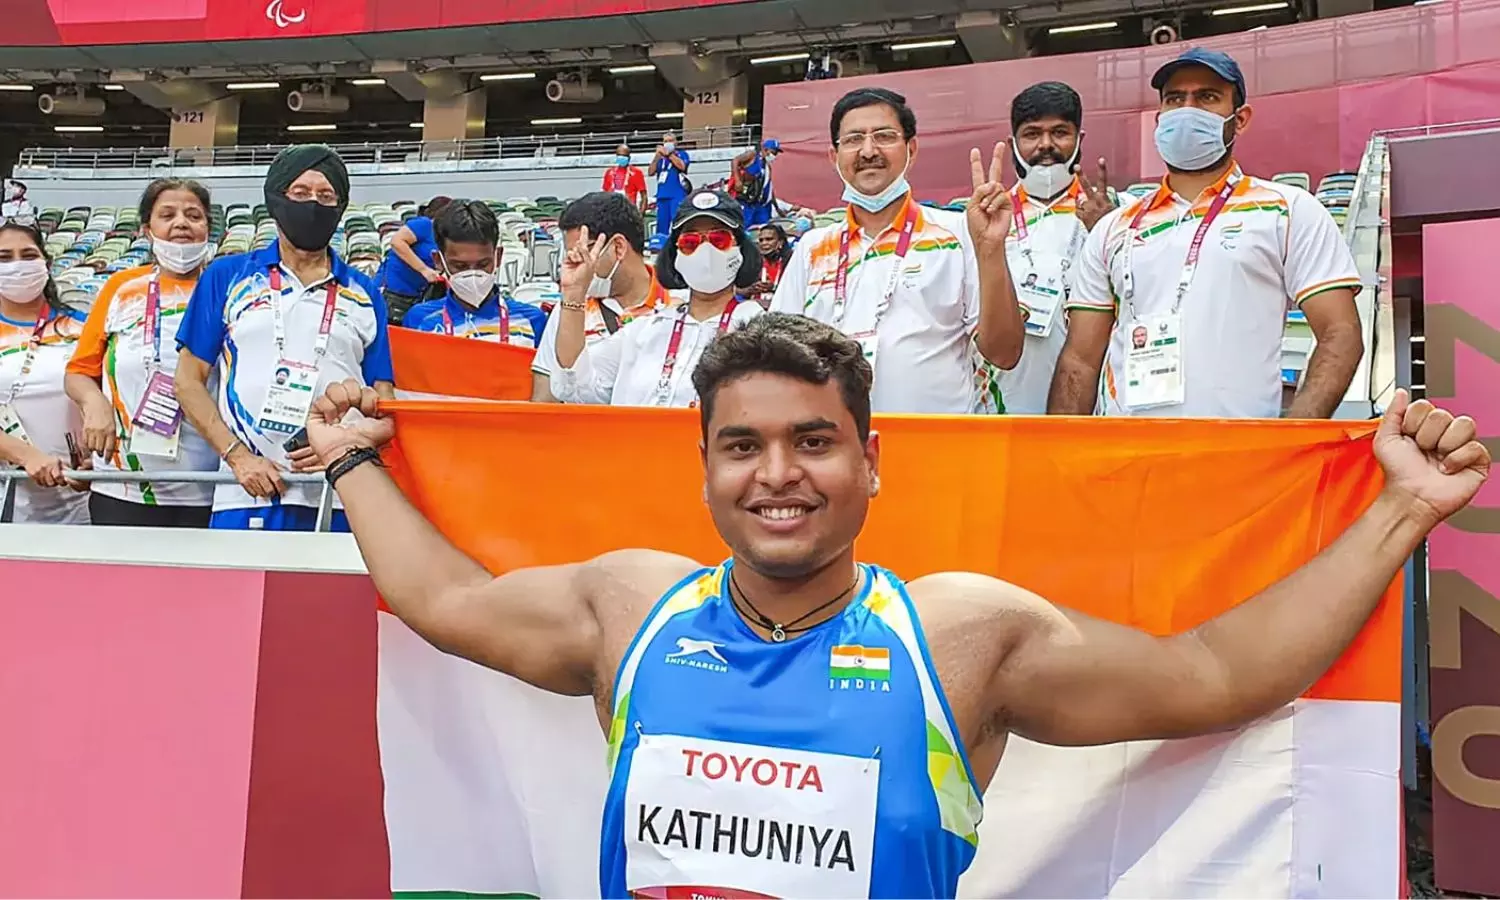 India win impressive 34 medals at Wheelchair and Amputee World Games